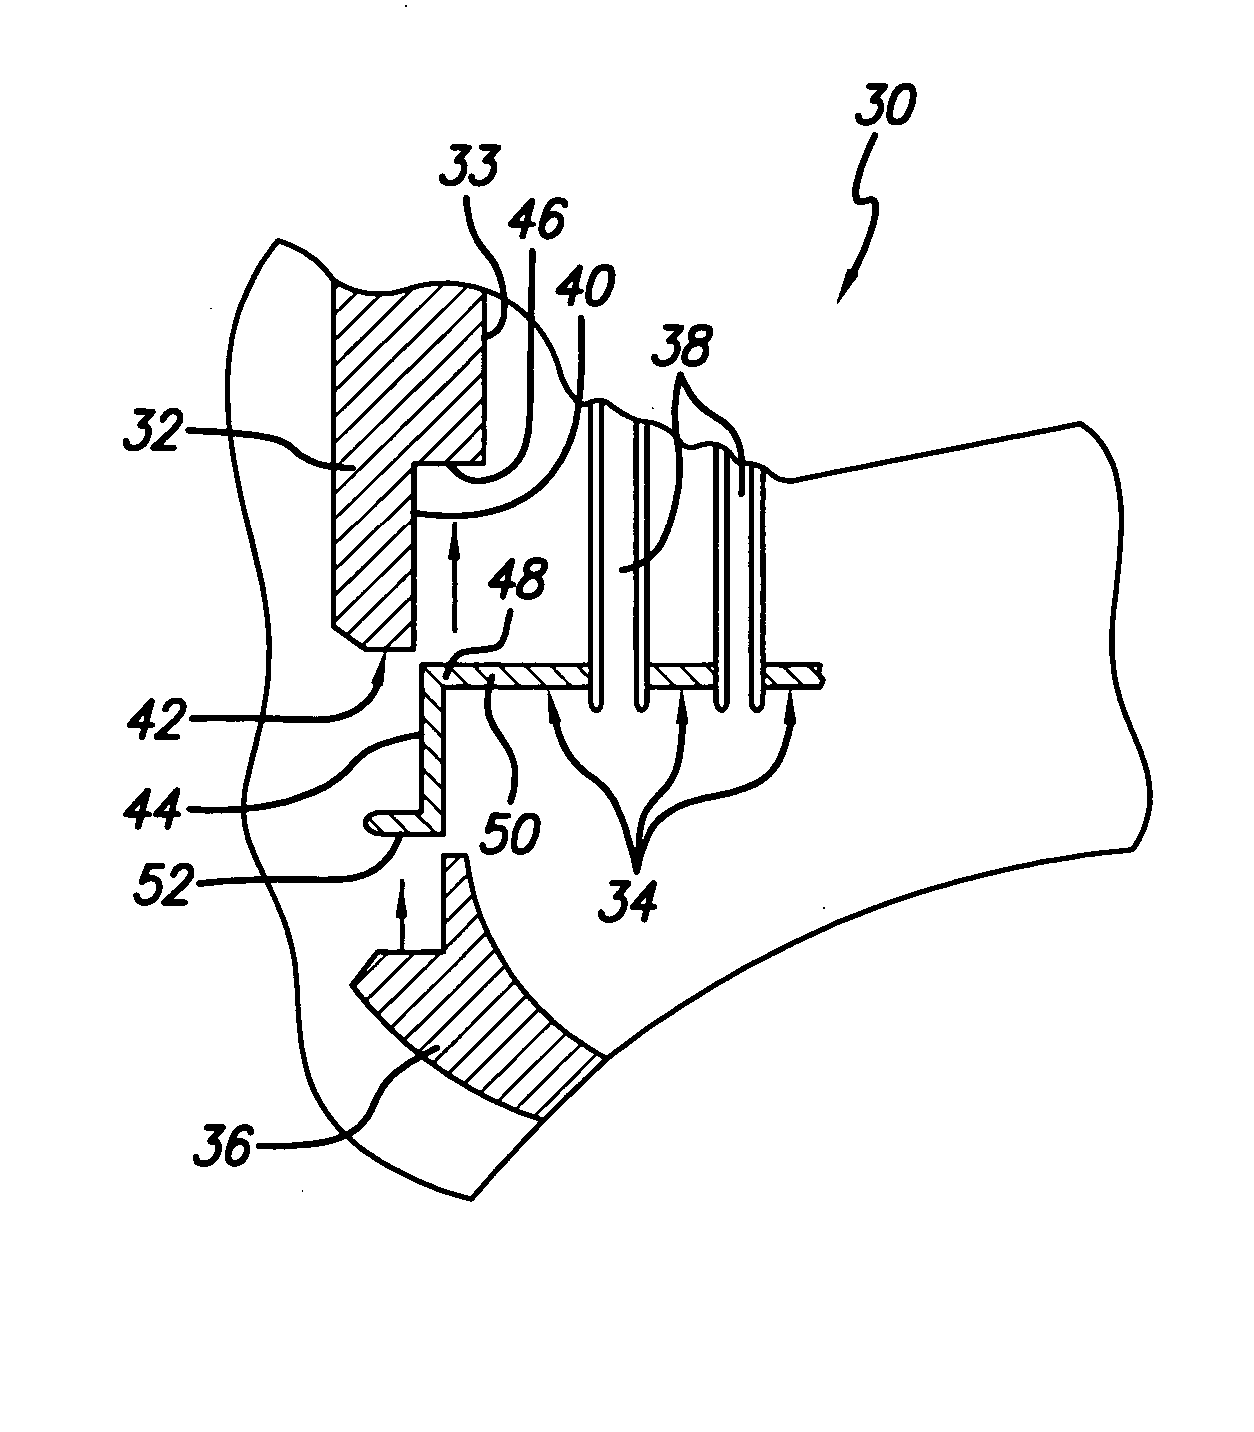 Nested attachment junction for heat exchanger